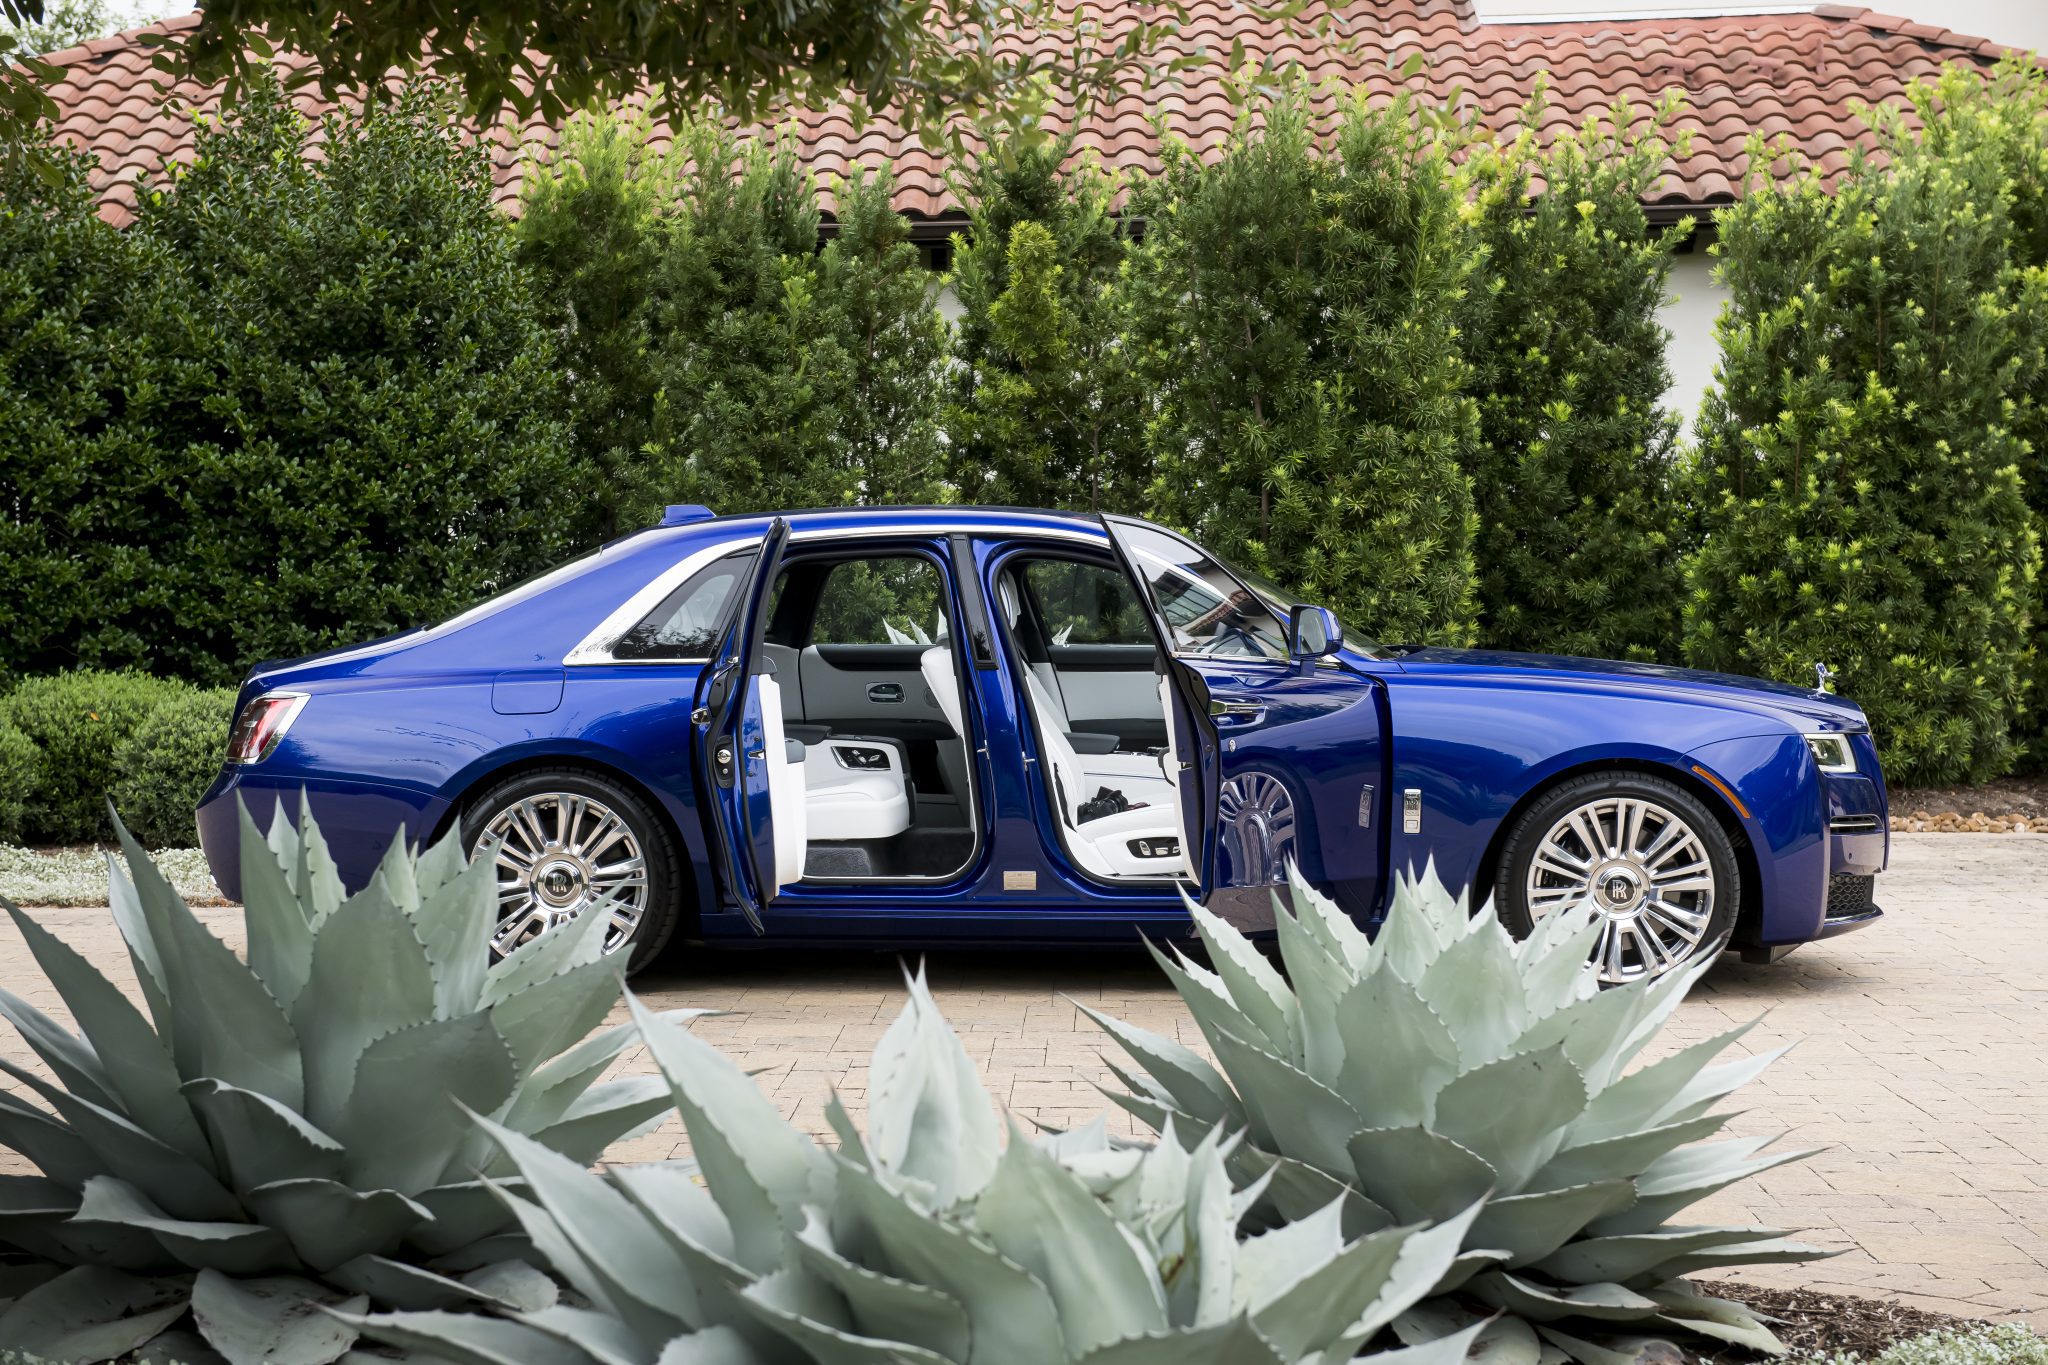 The New Rolls Royce Ghost Is An Evolution Of Refined Elegance